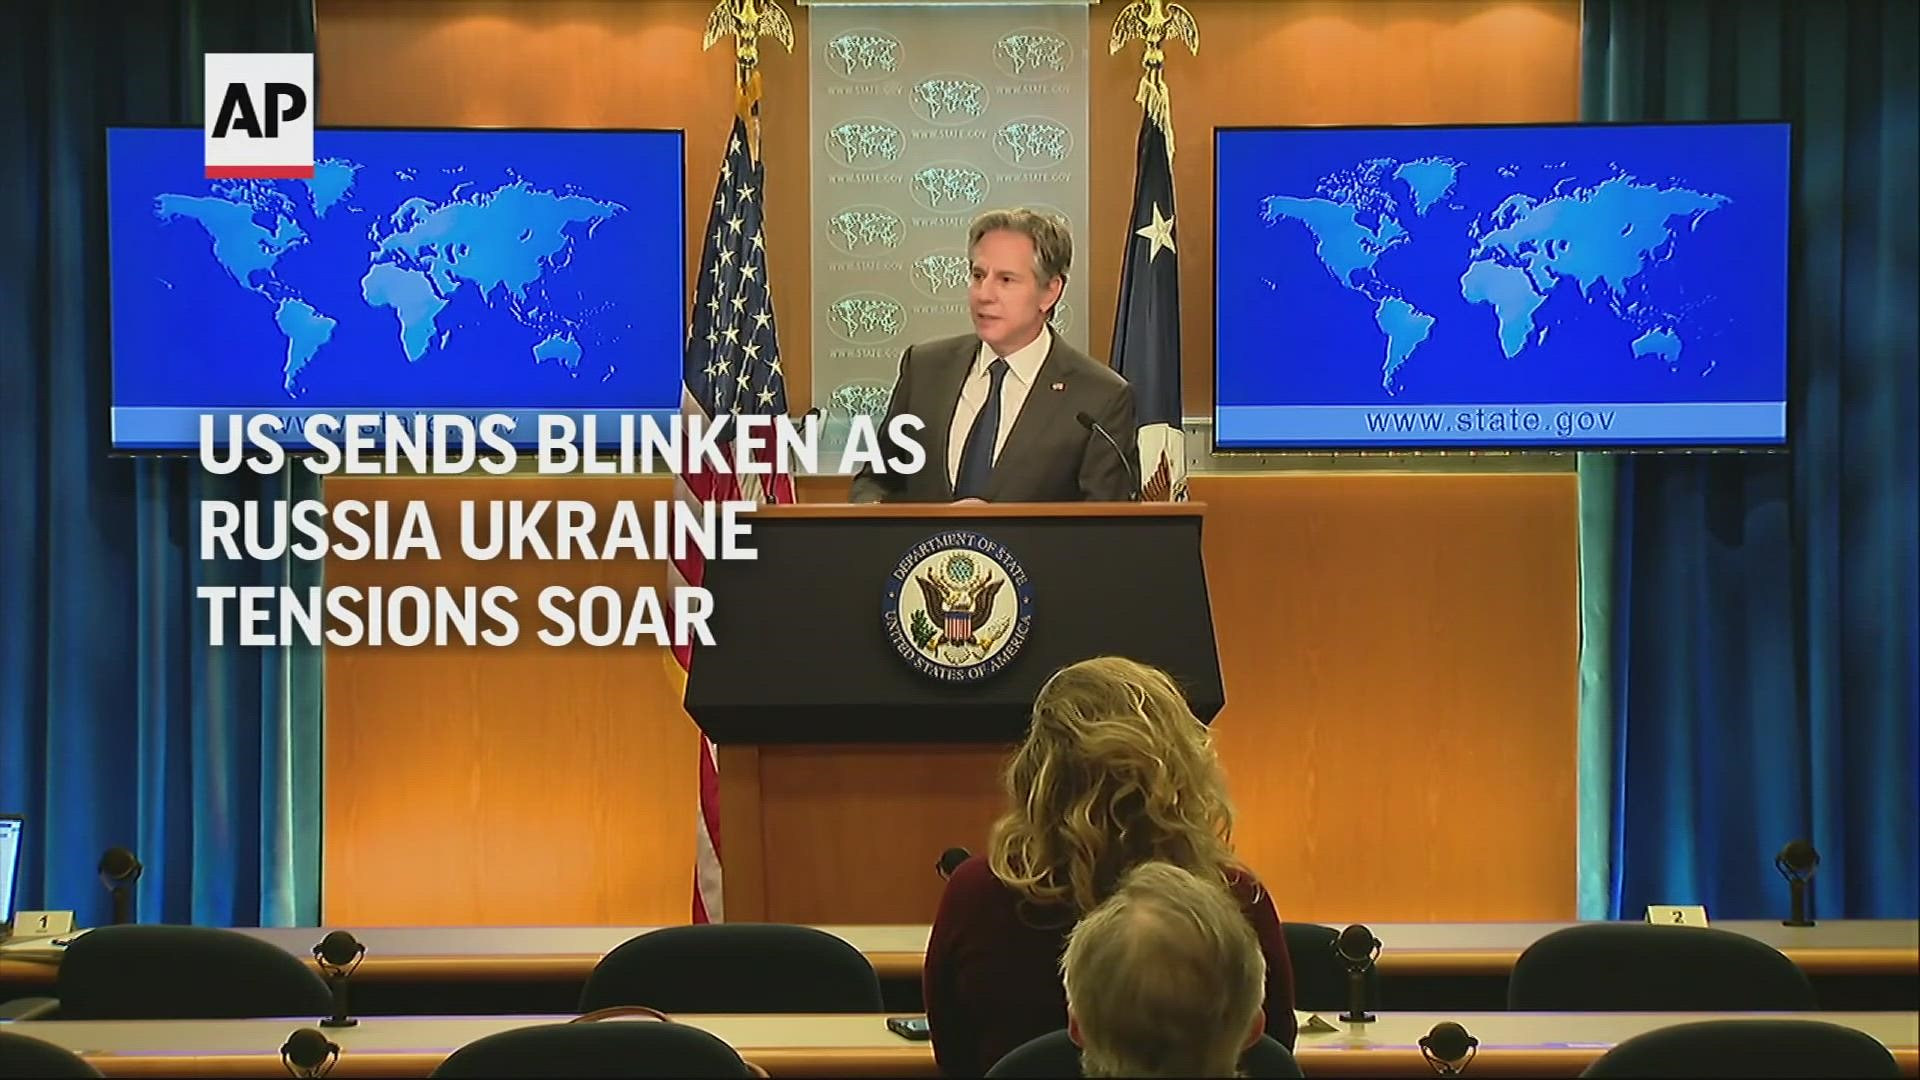 Secretary of State Antony Blinken said the US remains committed to a sovereign Ukraine as tensions with Russia mount.